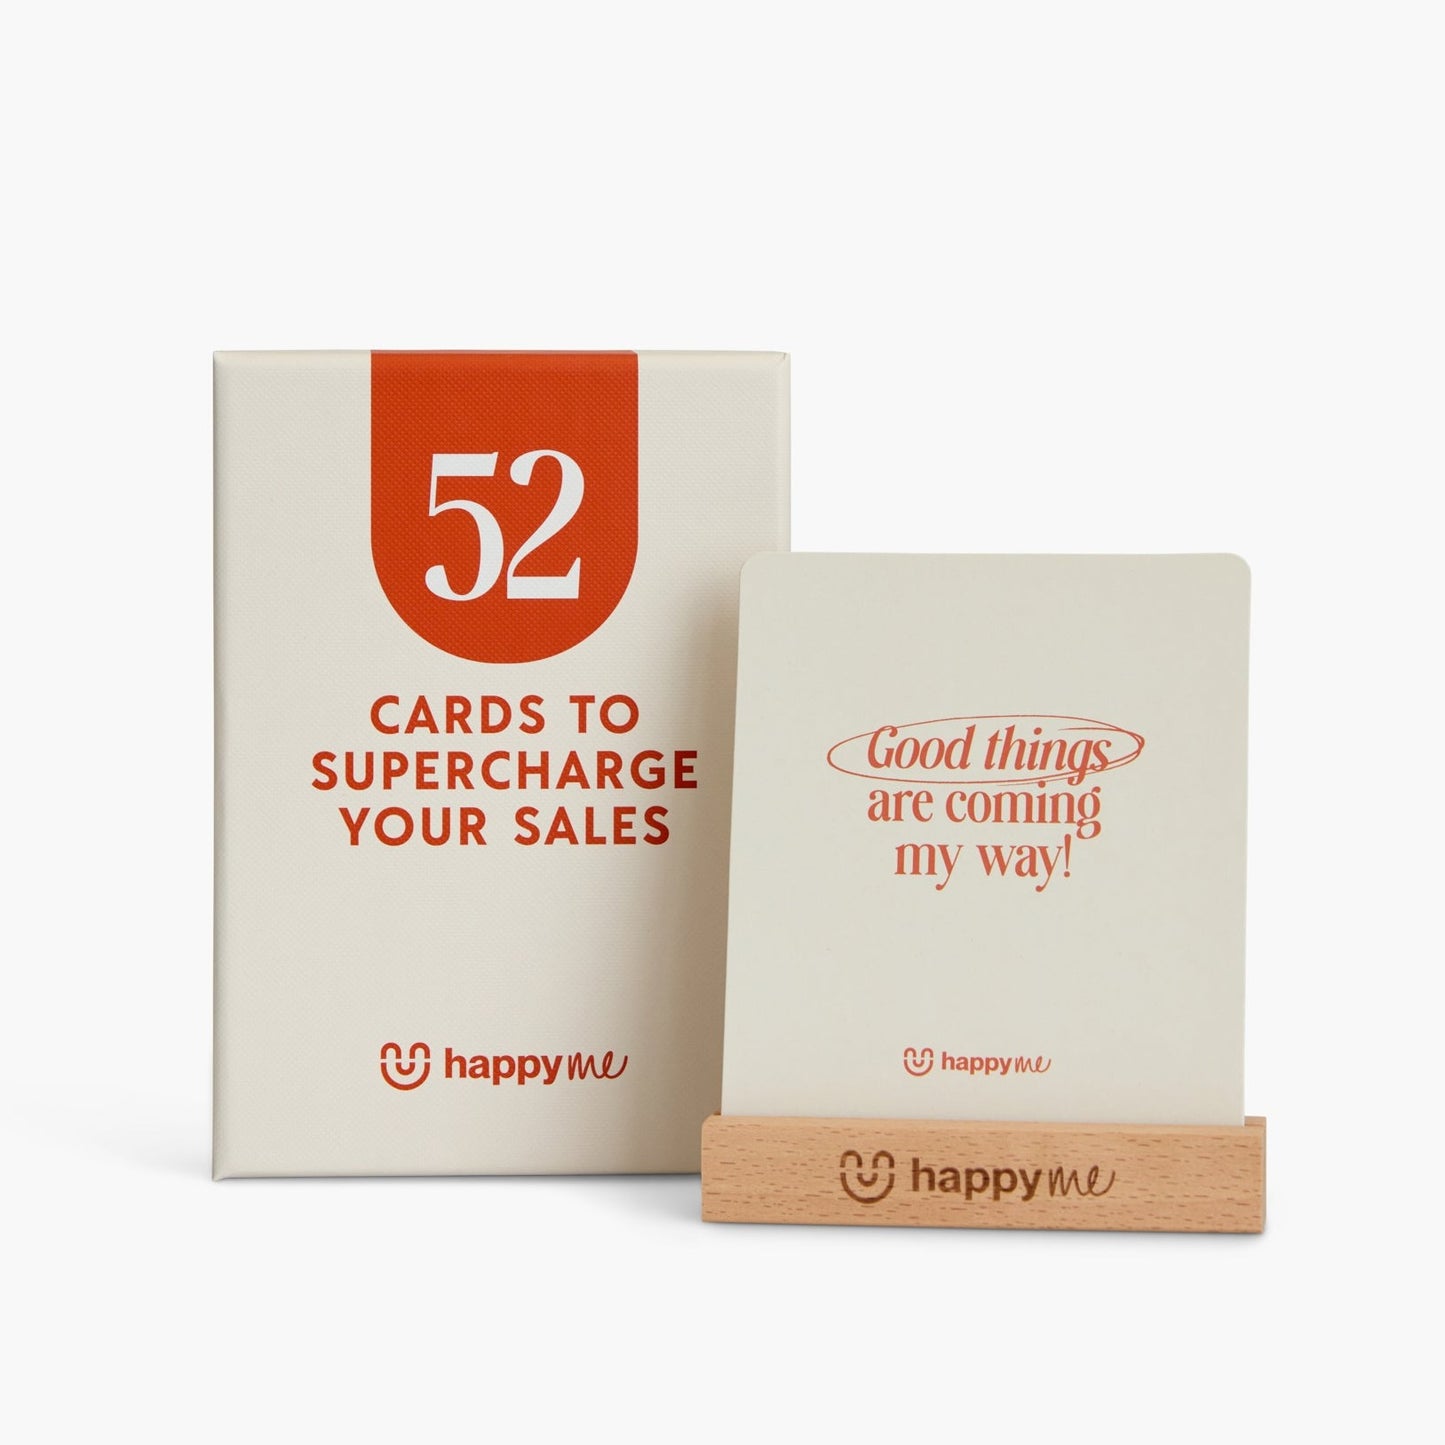 52 CARDS TO SUPERCHARGE YOUR SALES